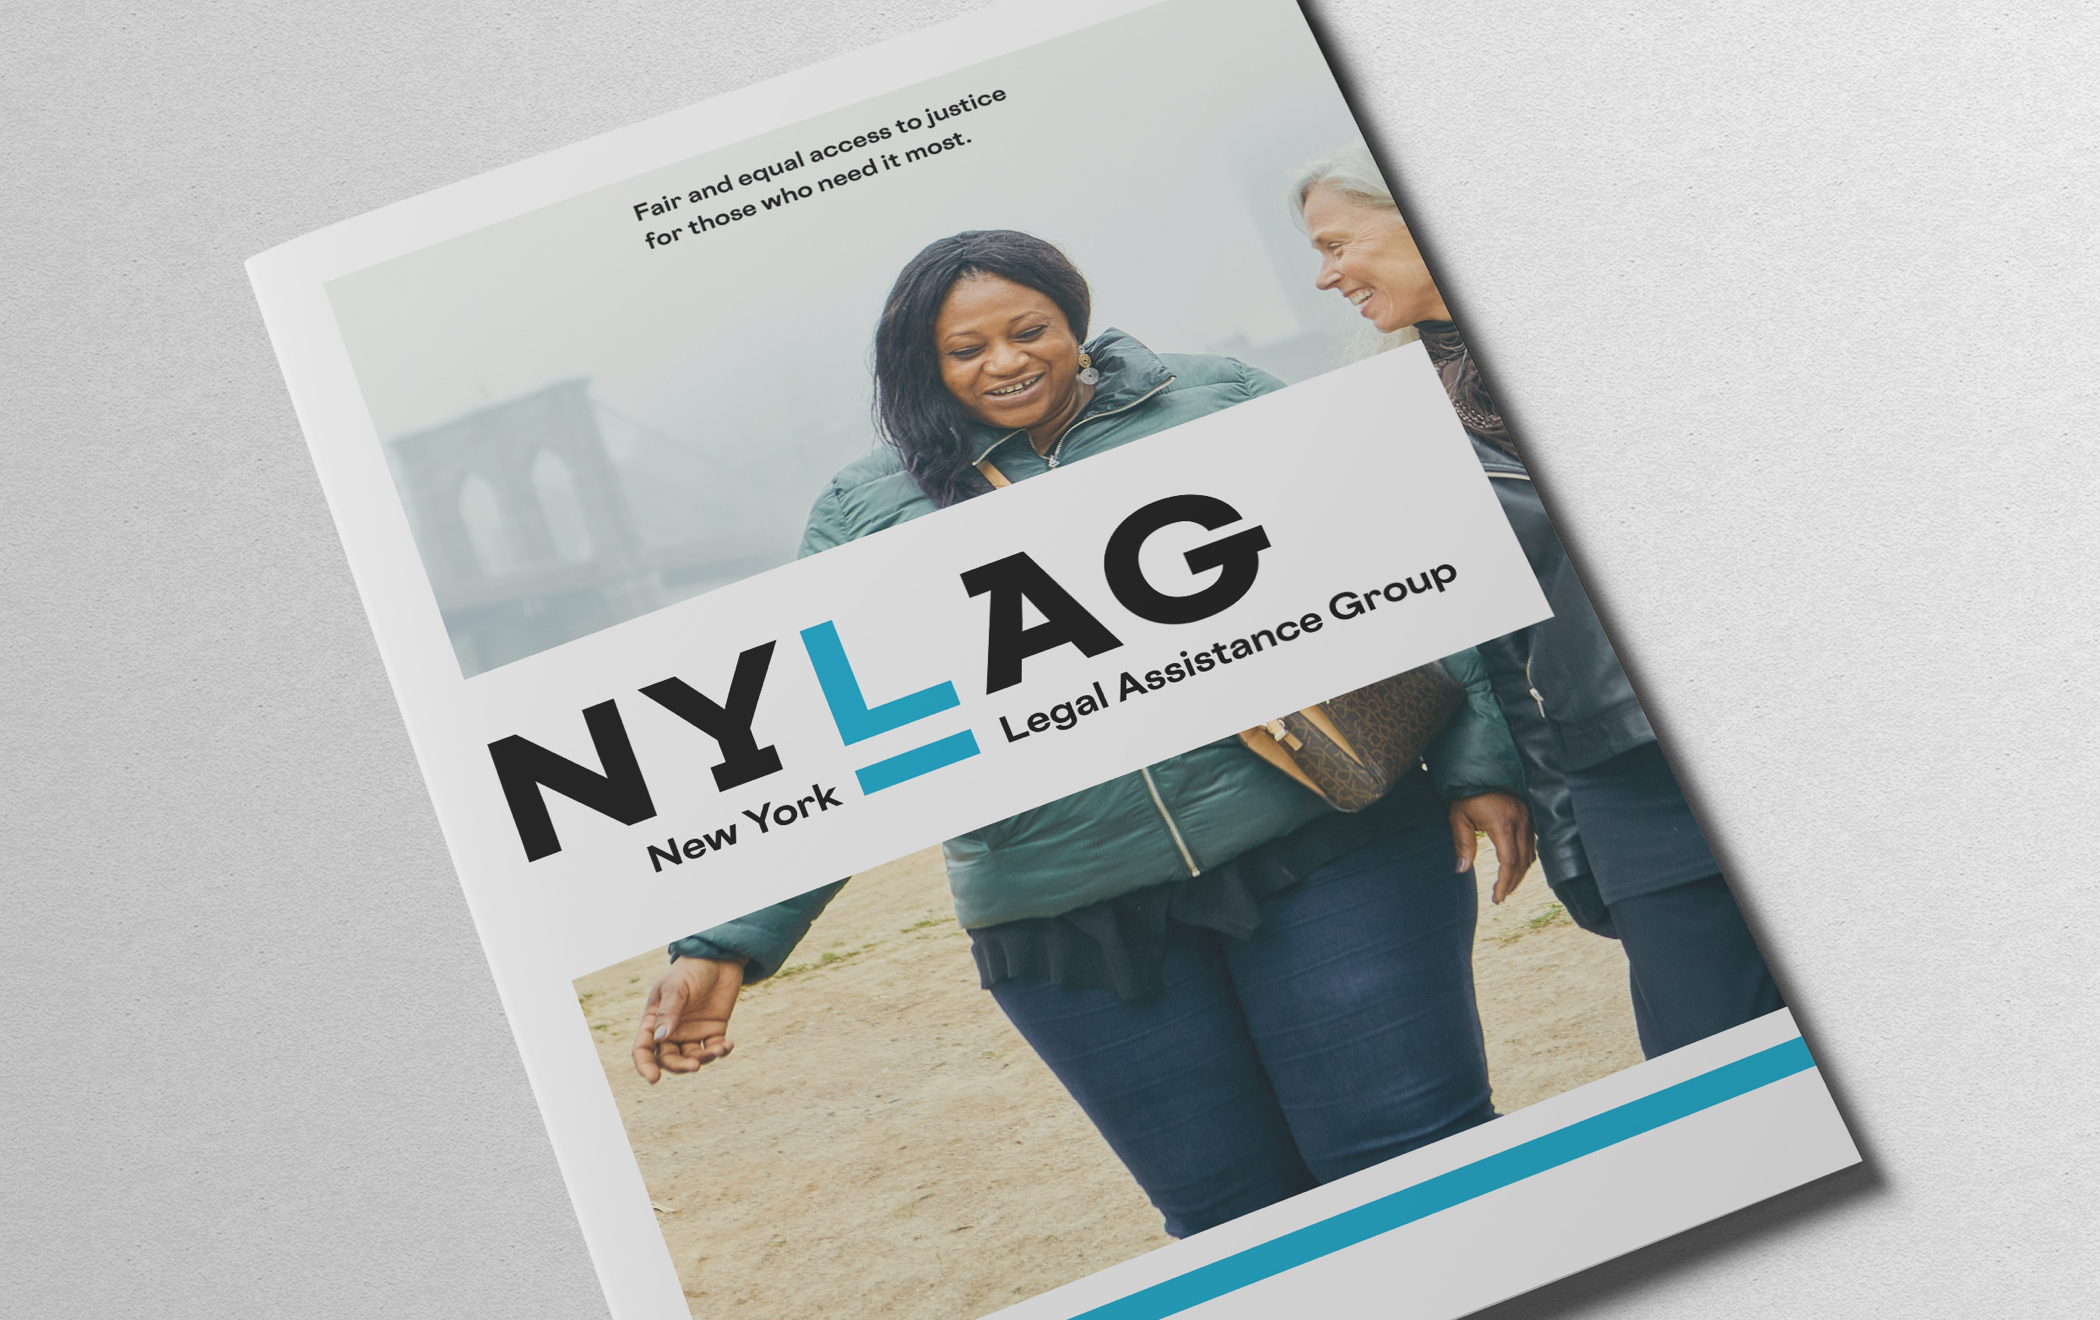 New York Legal Assistance Group brochure cover with title "Fair and equal access to justice for those who need it most."